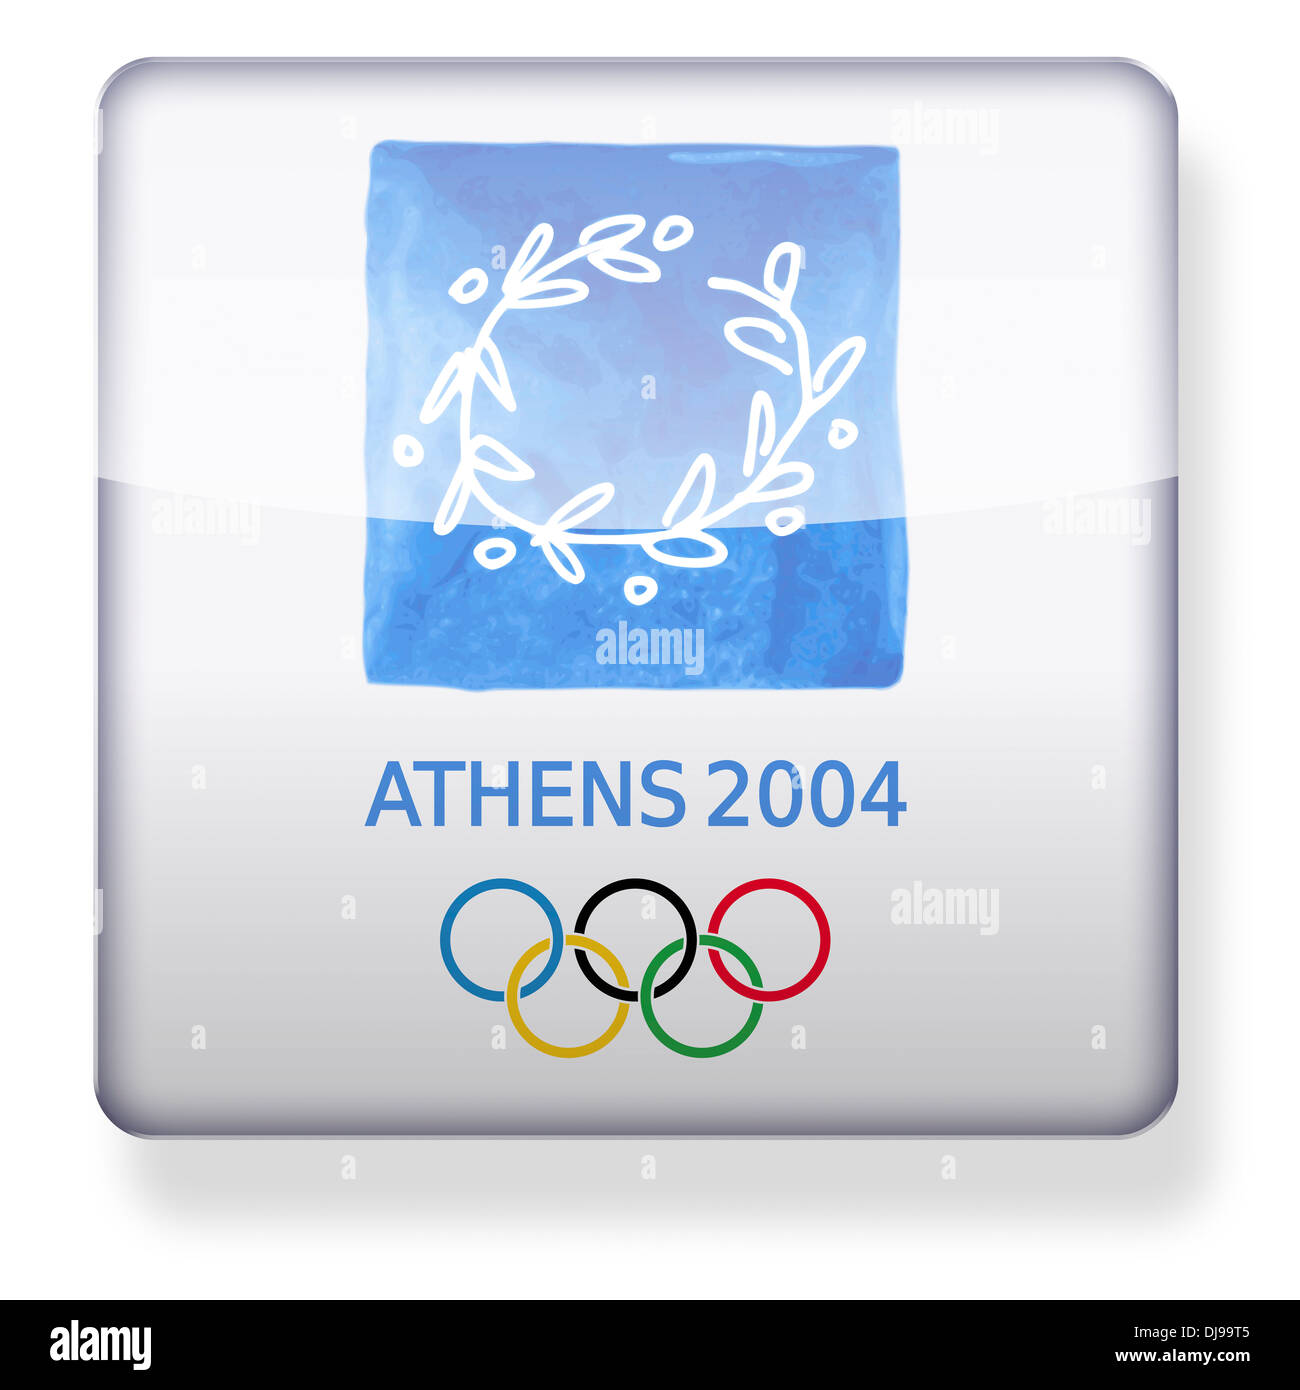 Athens 2004 Olympics logo as an app icon. Clipping path included. Stock Photo